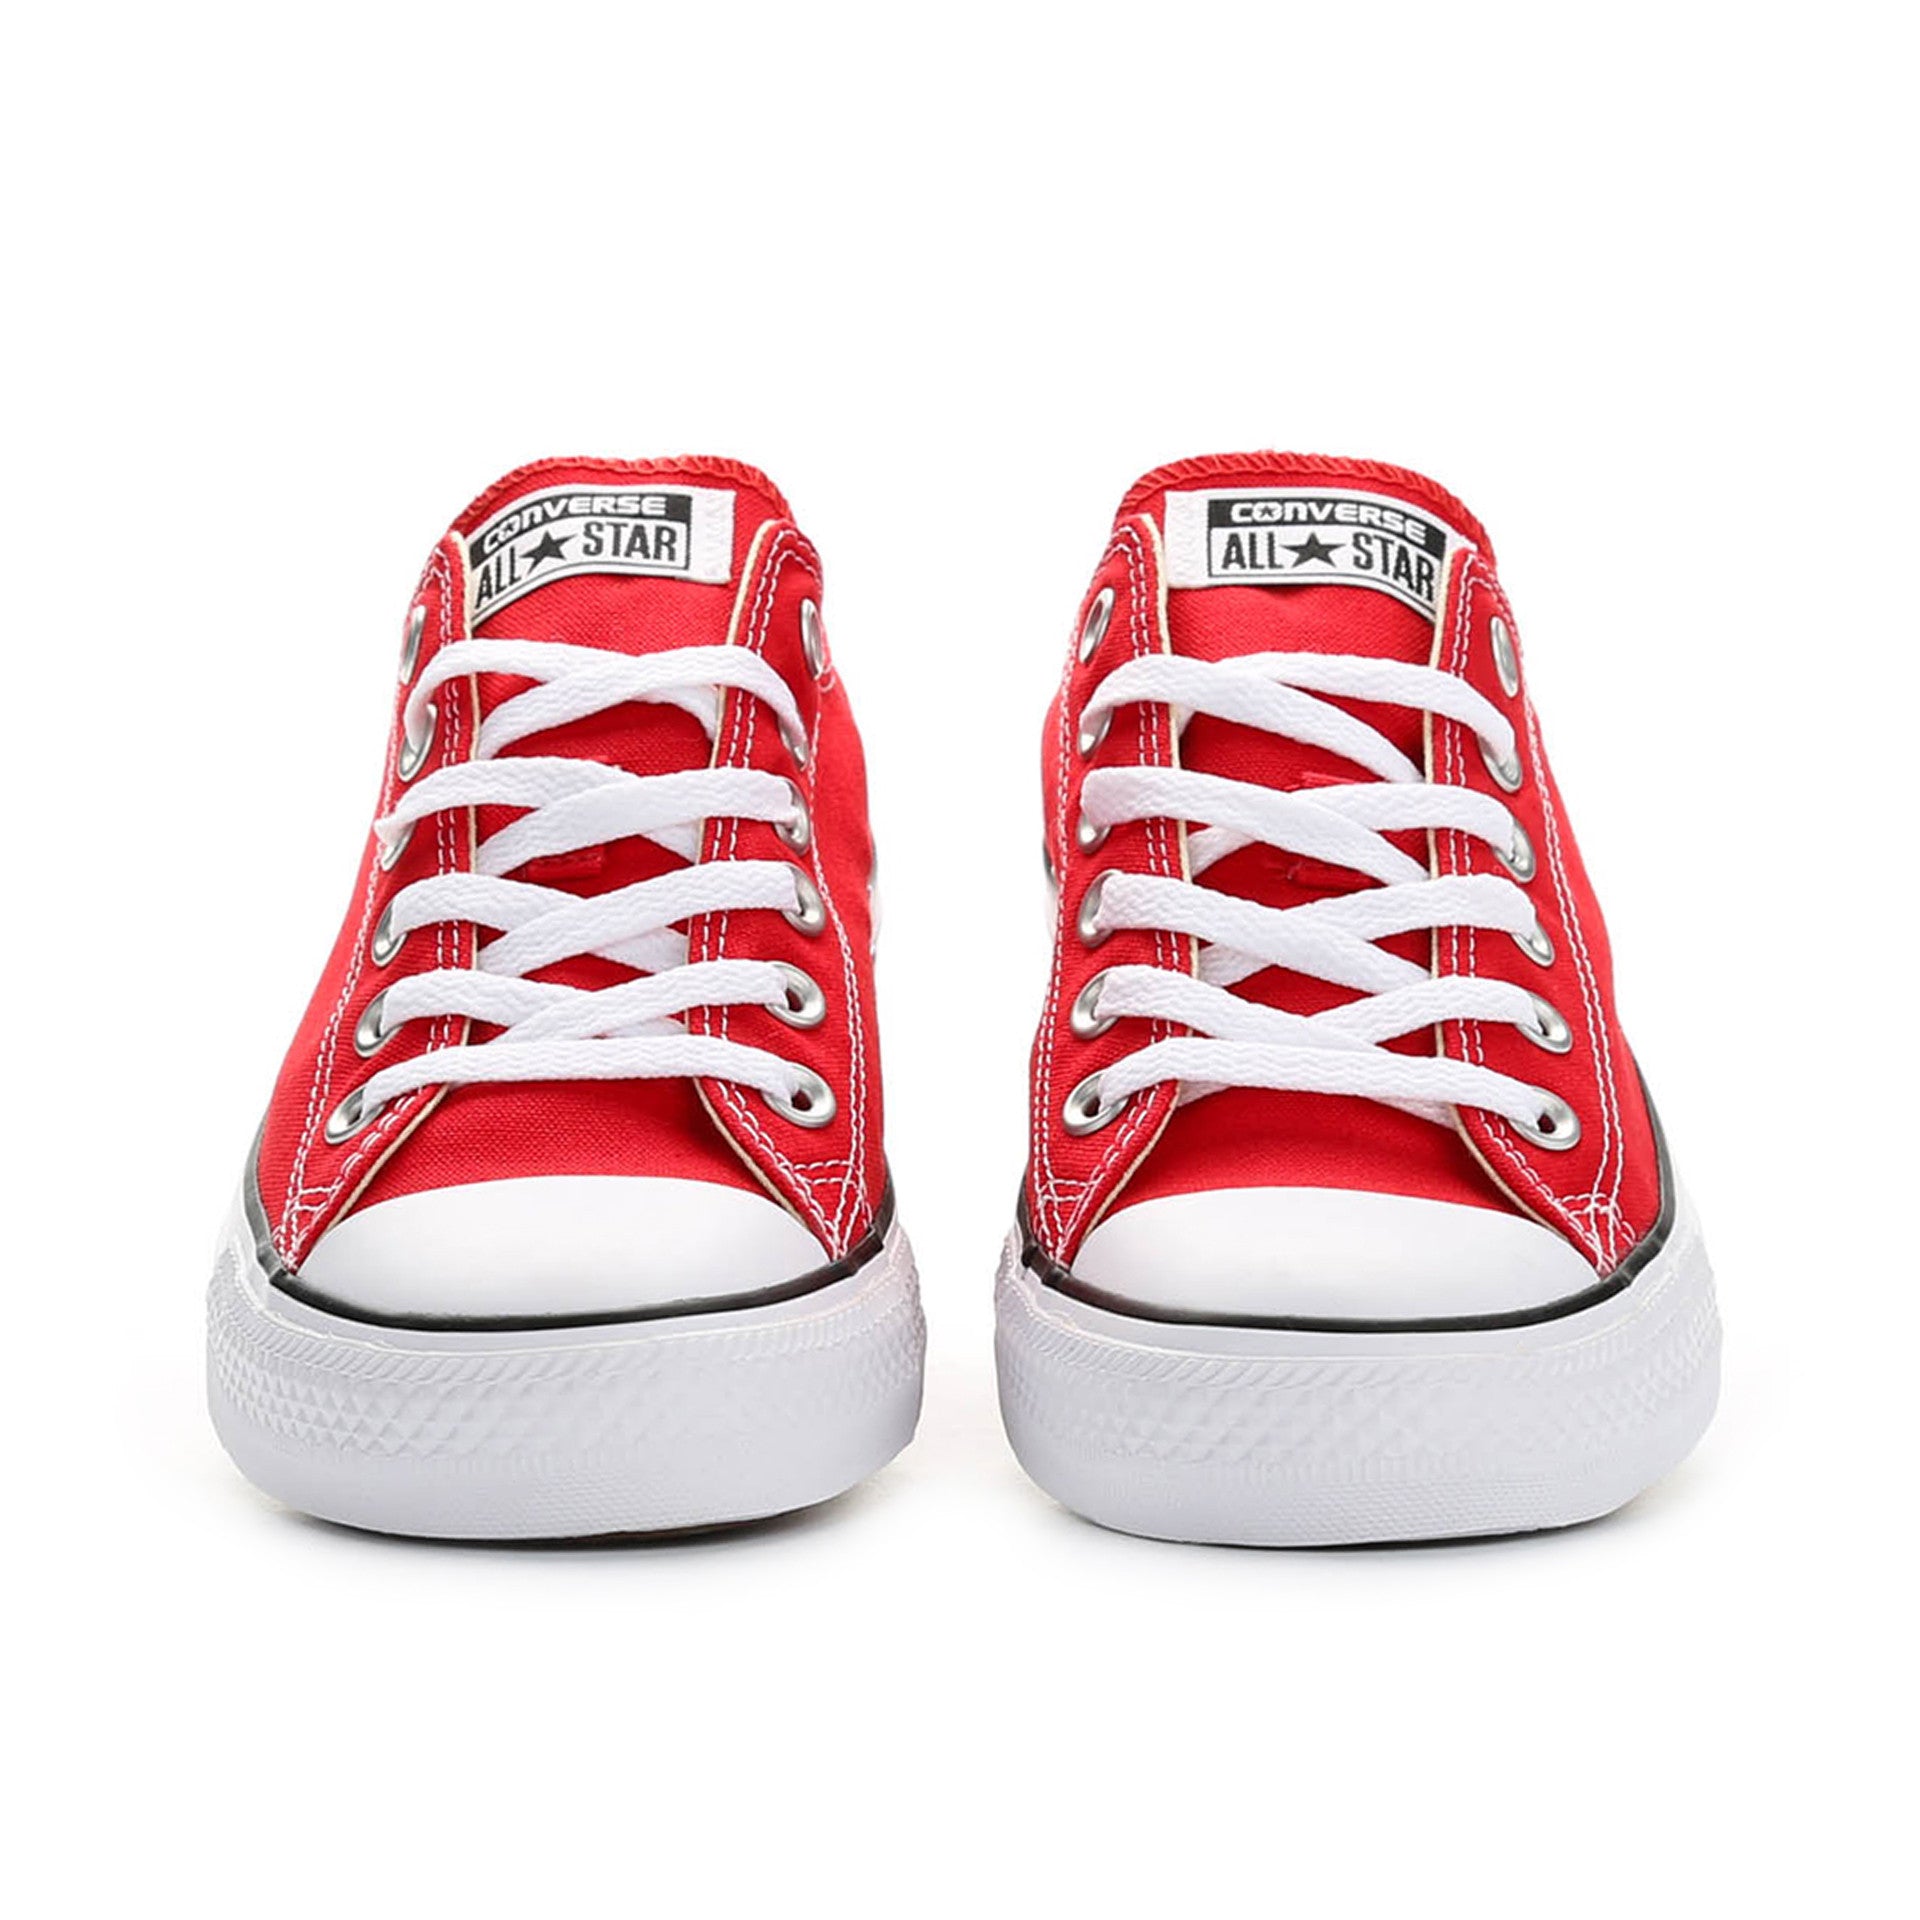 Converse Chuck Taylor Ox Low Top - Red - New Star